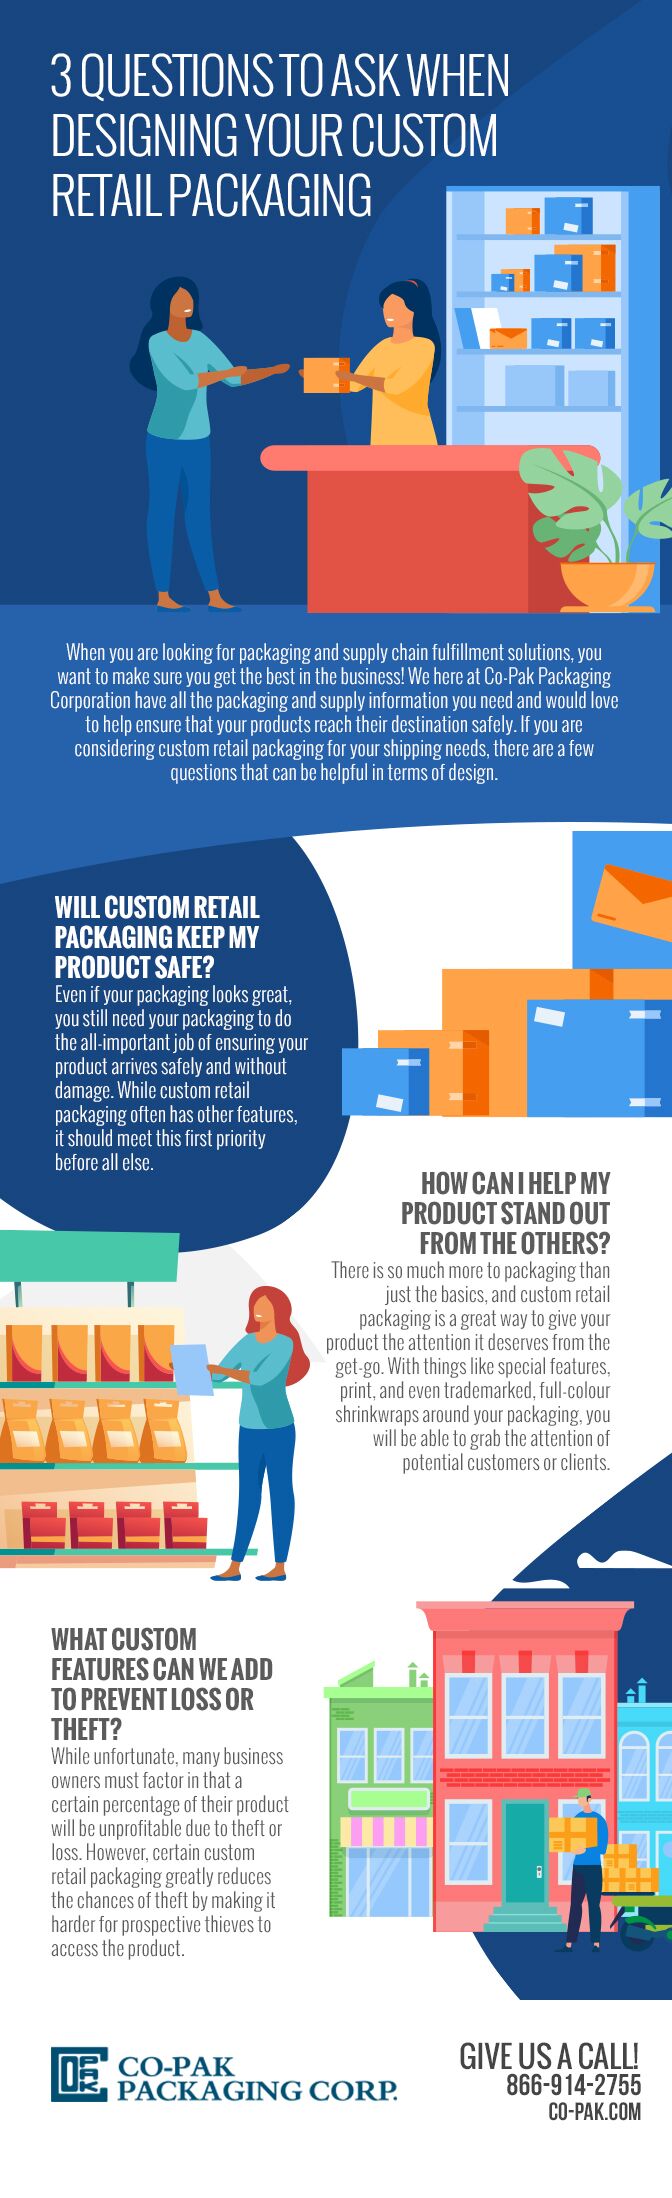 3 Questions to Ask When Designing Your Custom Retail Packaging